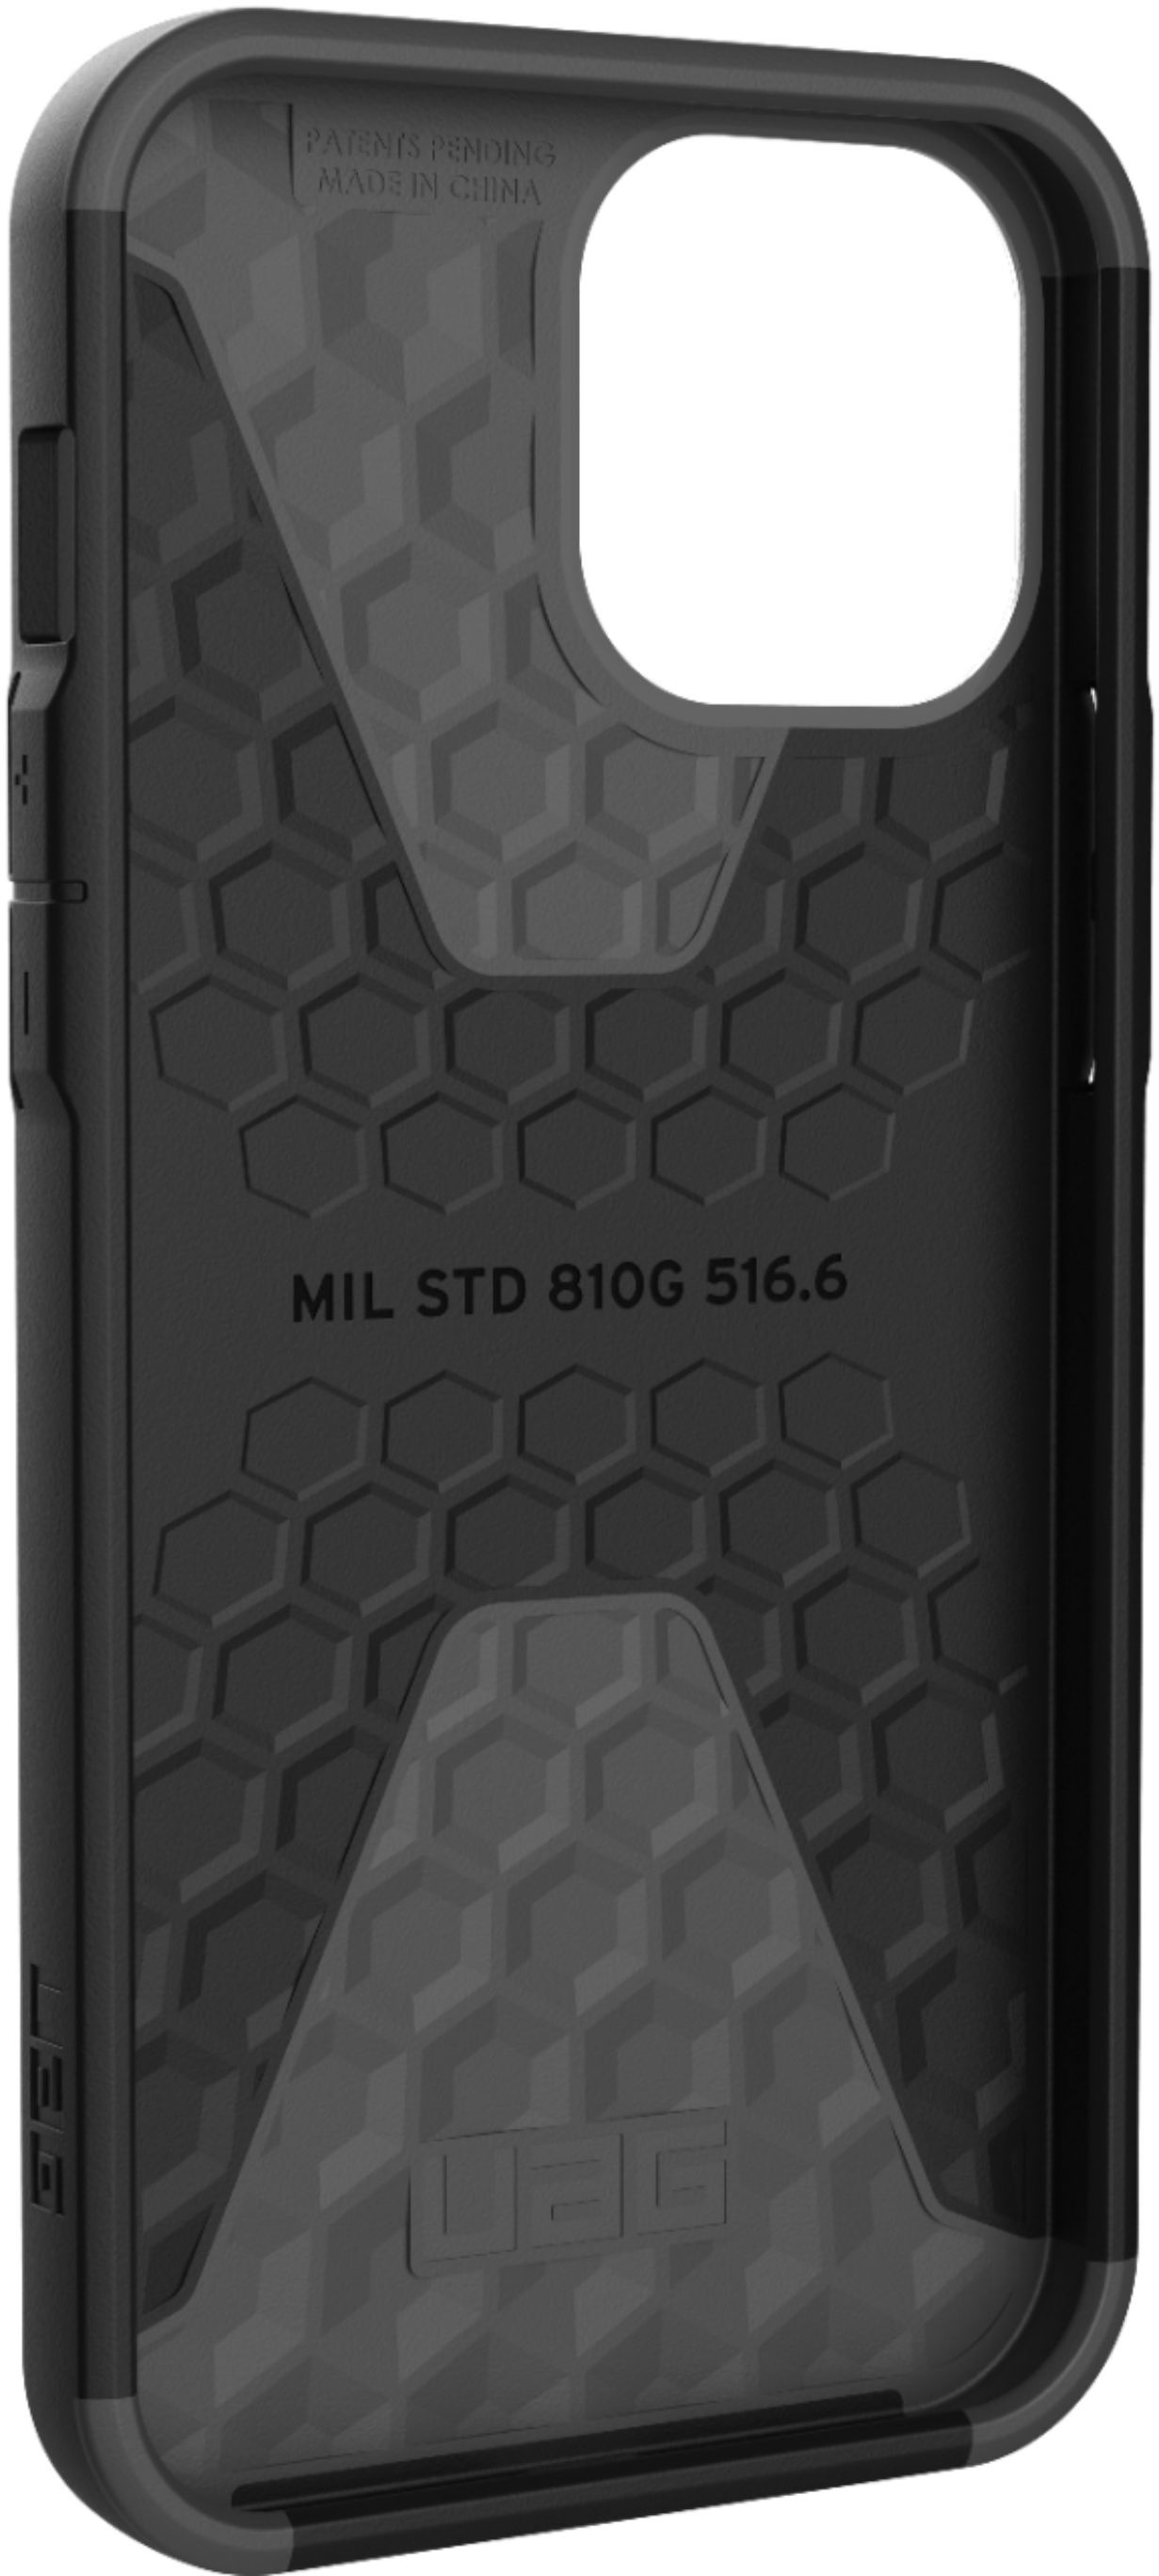 Uag Civilian Series Case For Iphone 12 Pro Max Silver d Best Buy